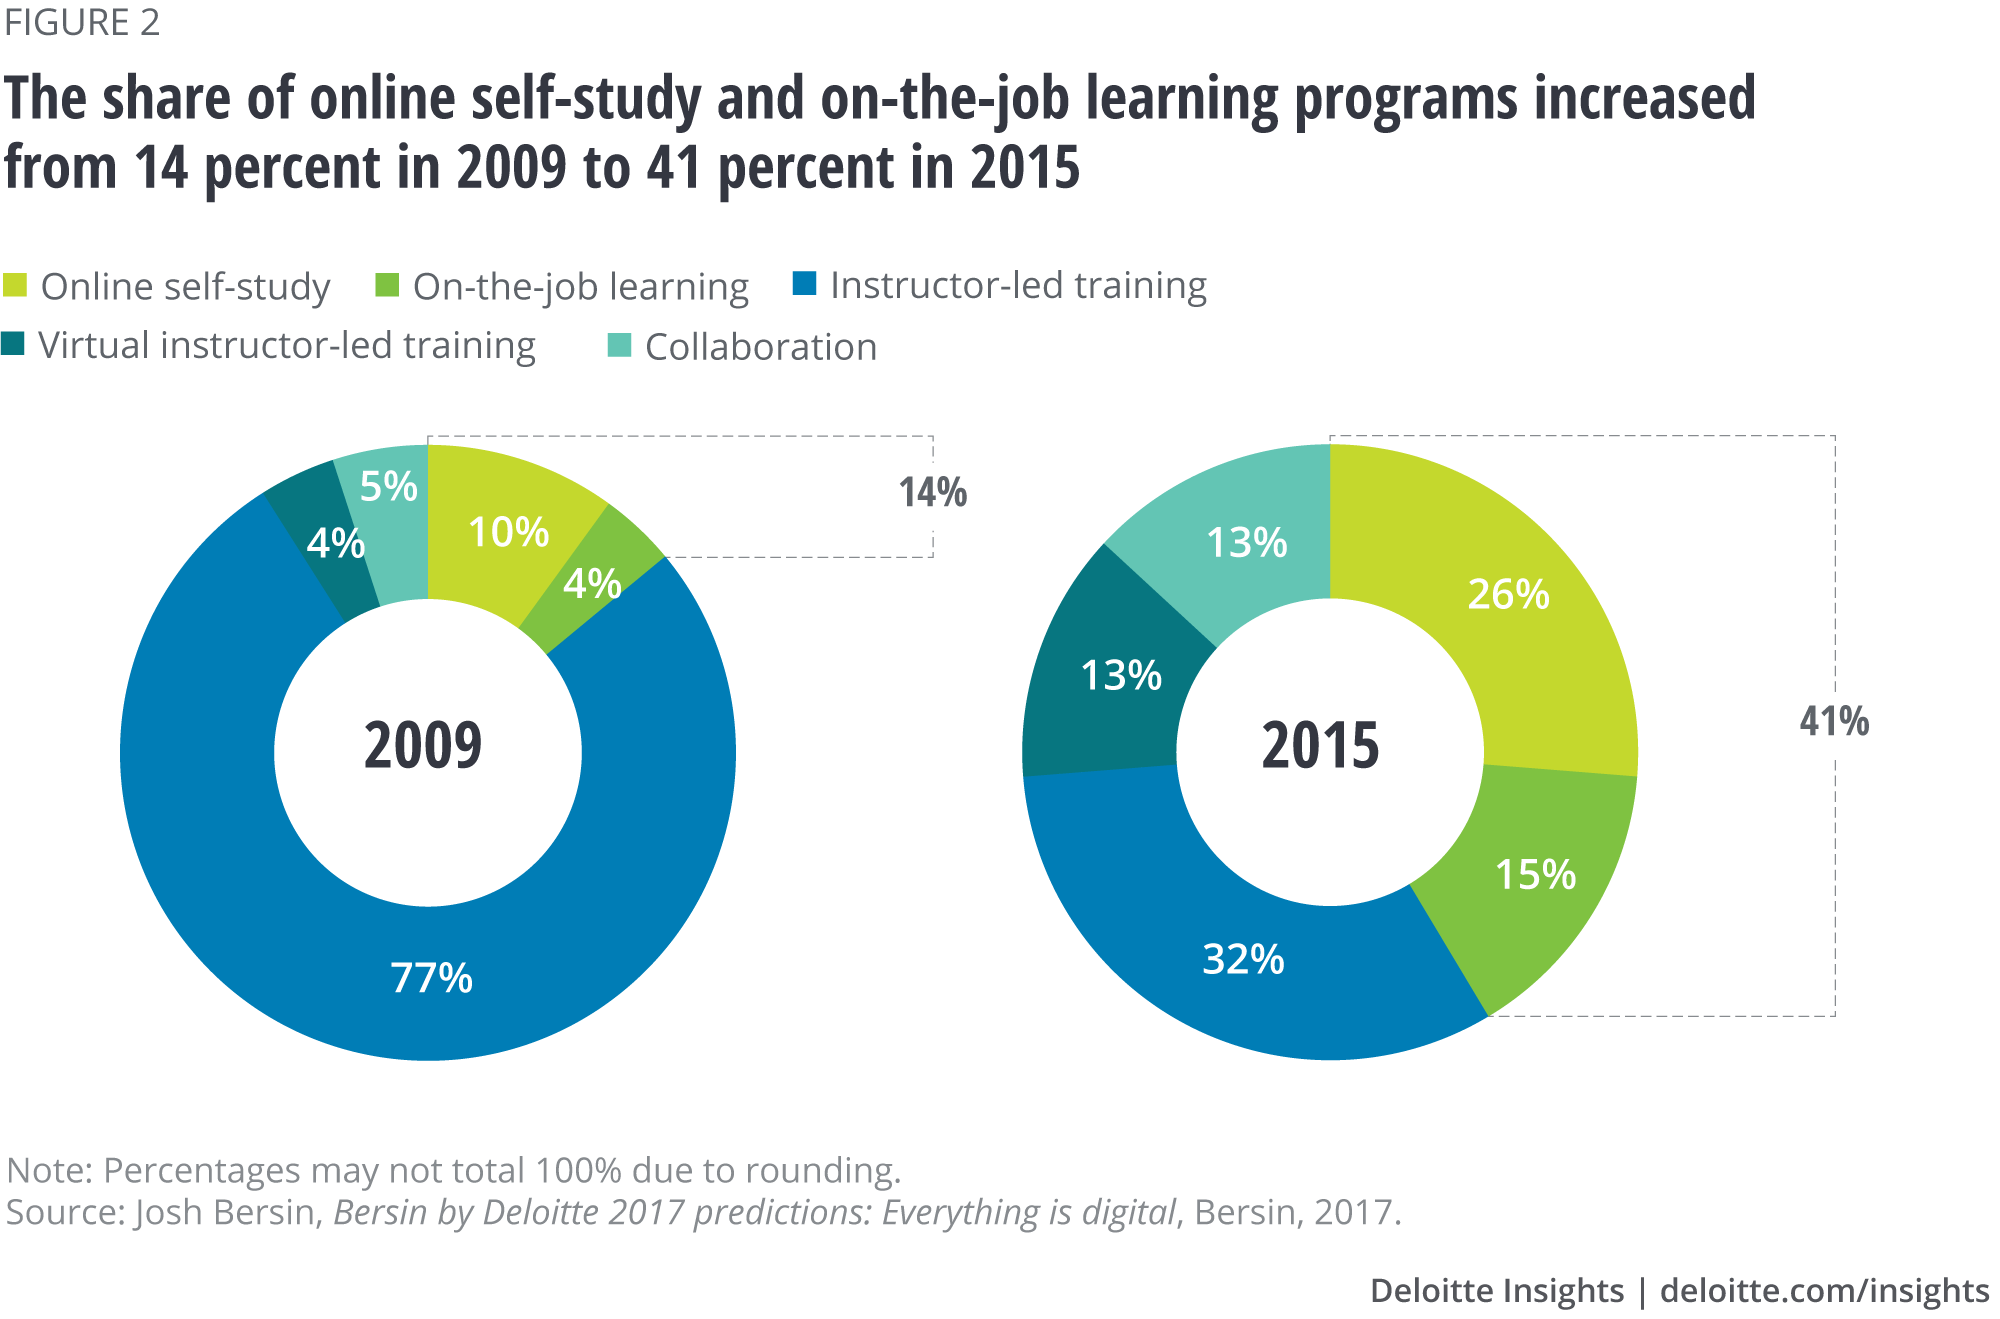 The share of online self-study and on-the-job learning programs increased from 14 percent in 2009 to 41 percent in 2015